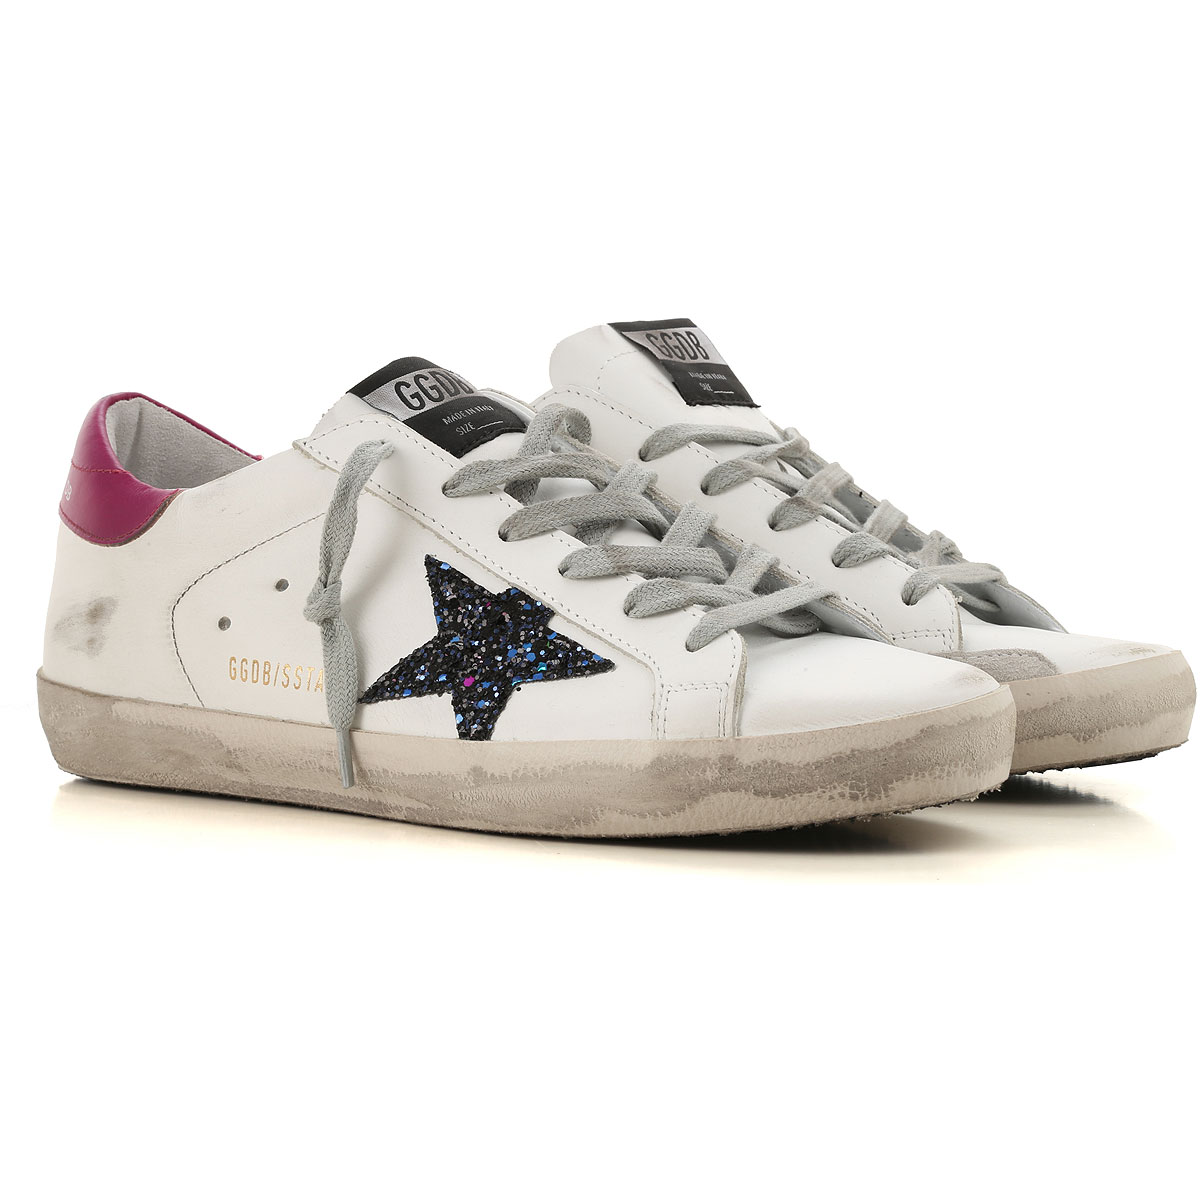 Womens Shoes Golden Goose, Style code: g34ws590-m76-